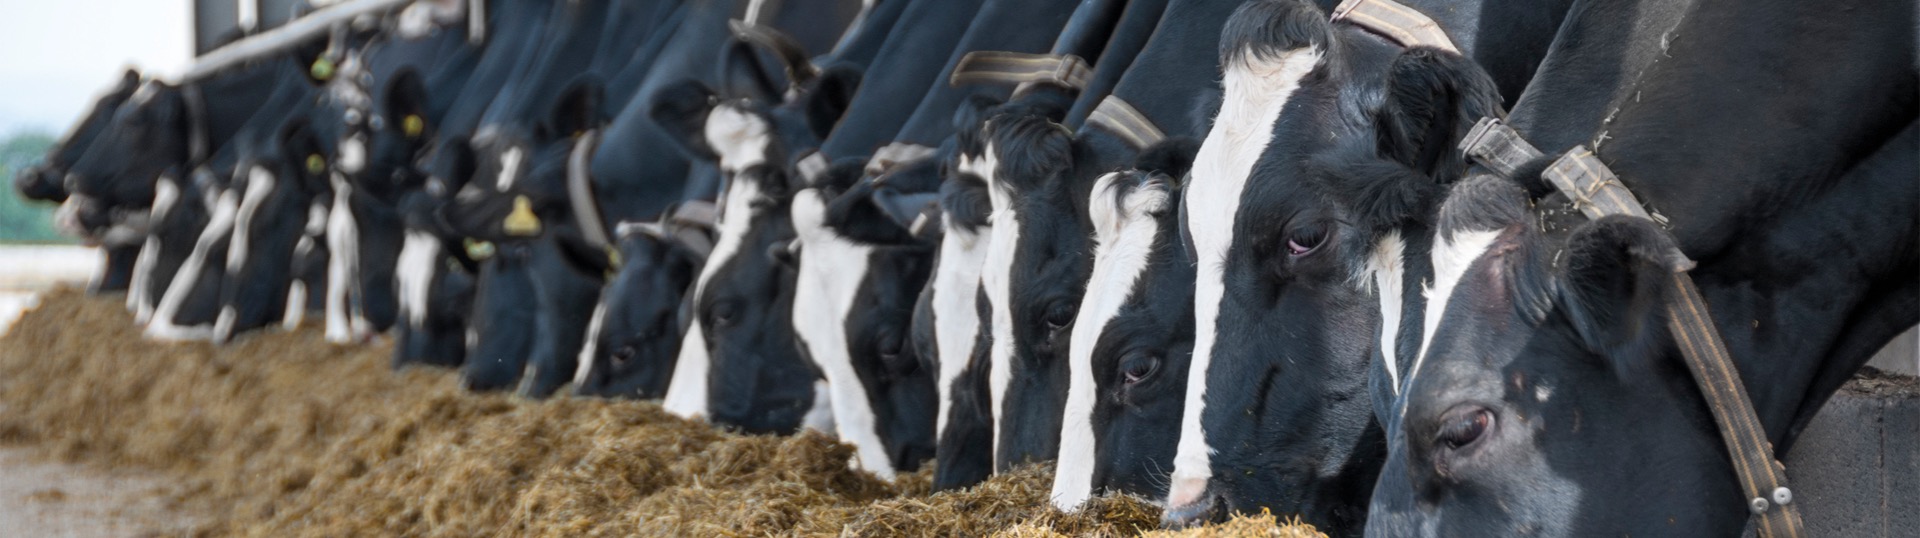 Actisaf® confirmed to reduce milk carbon footprint by 5%